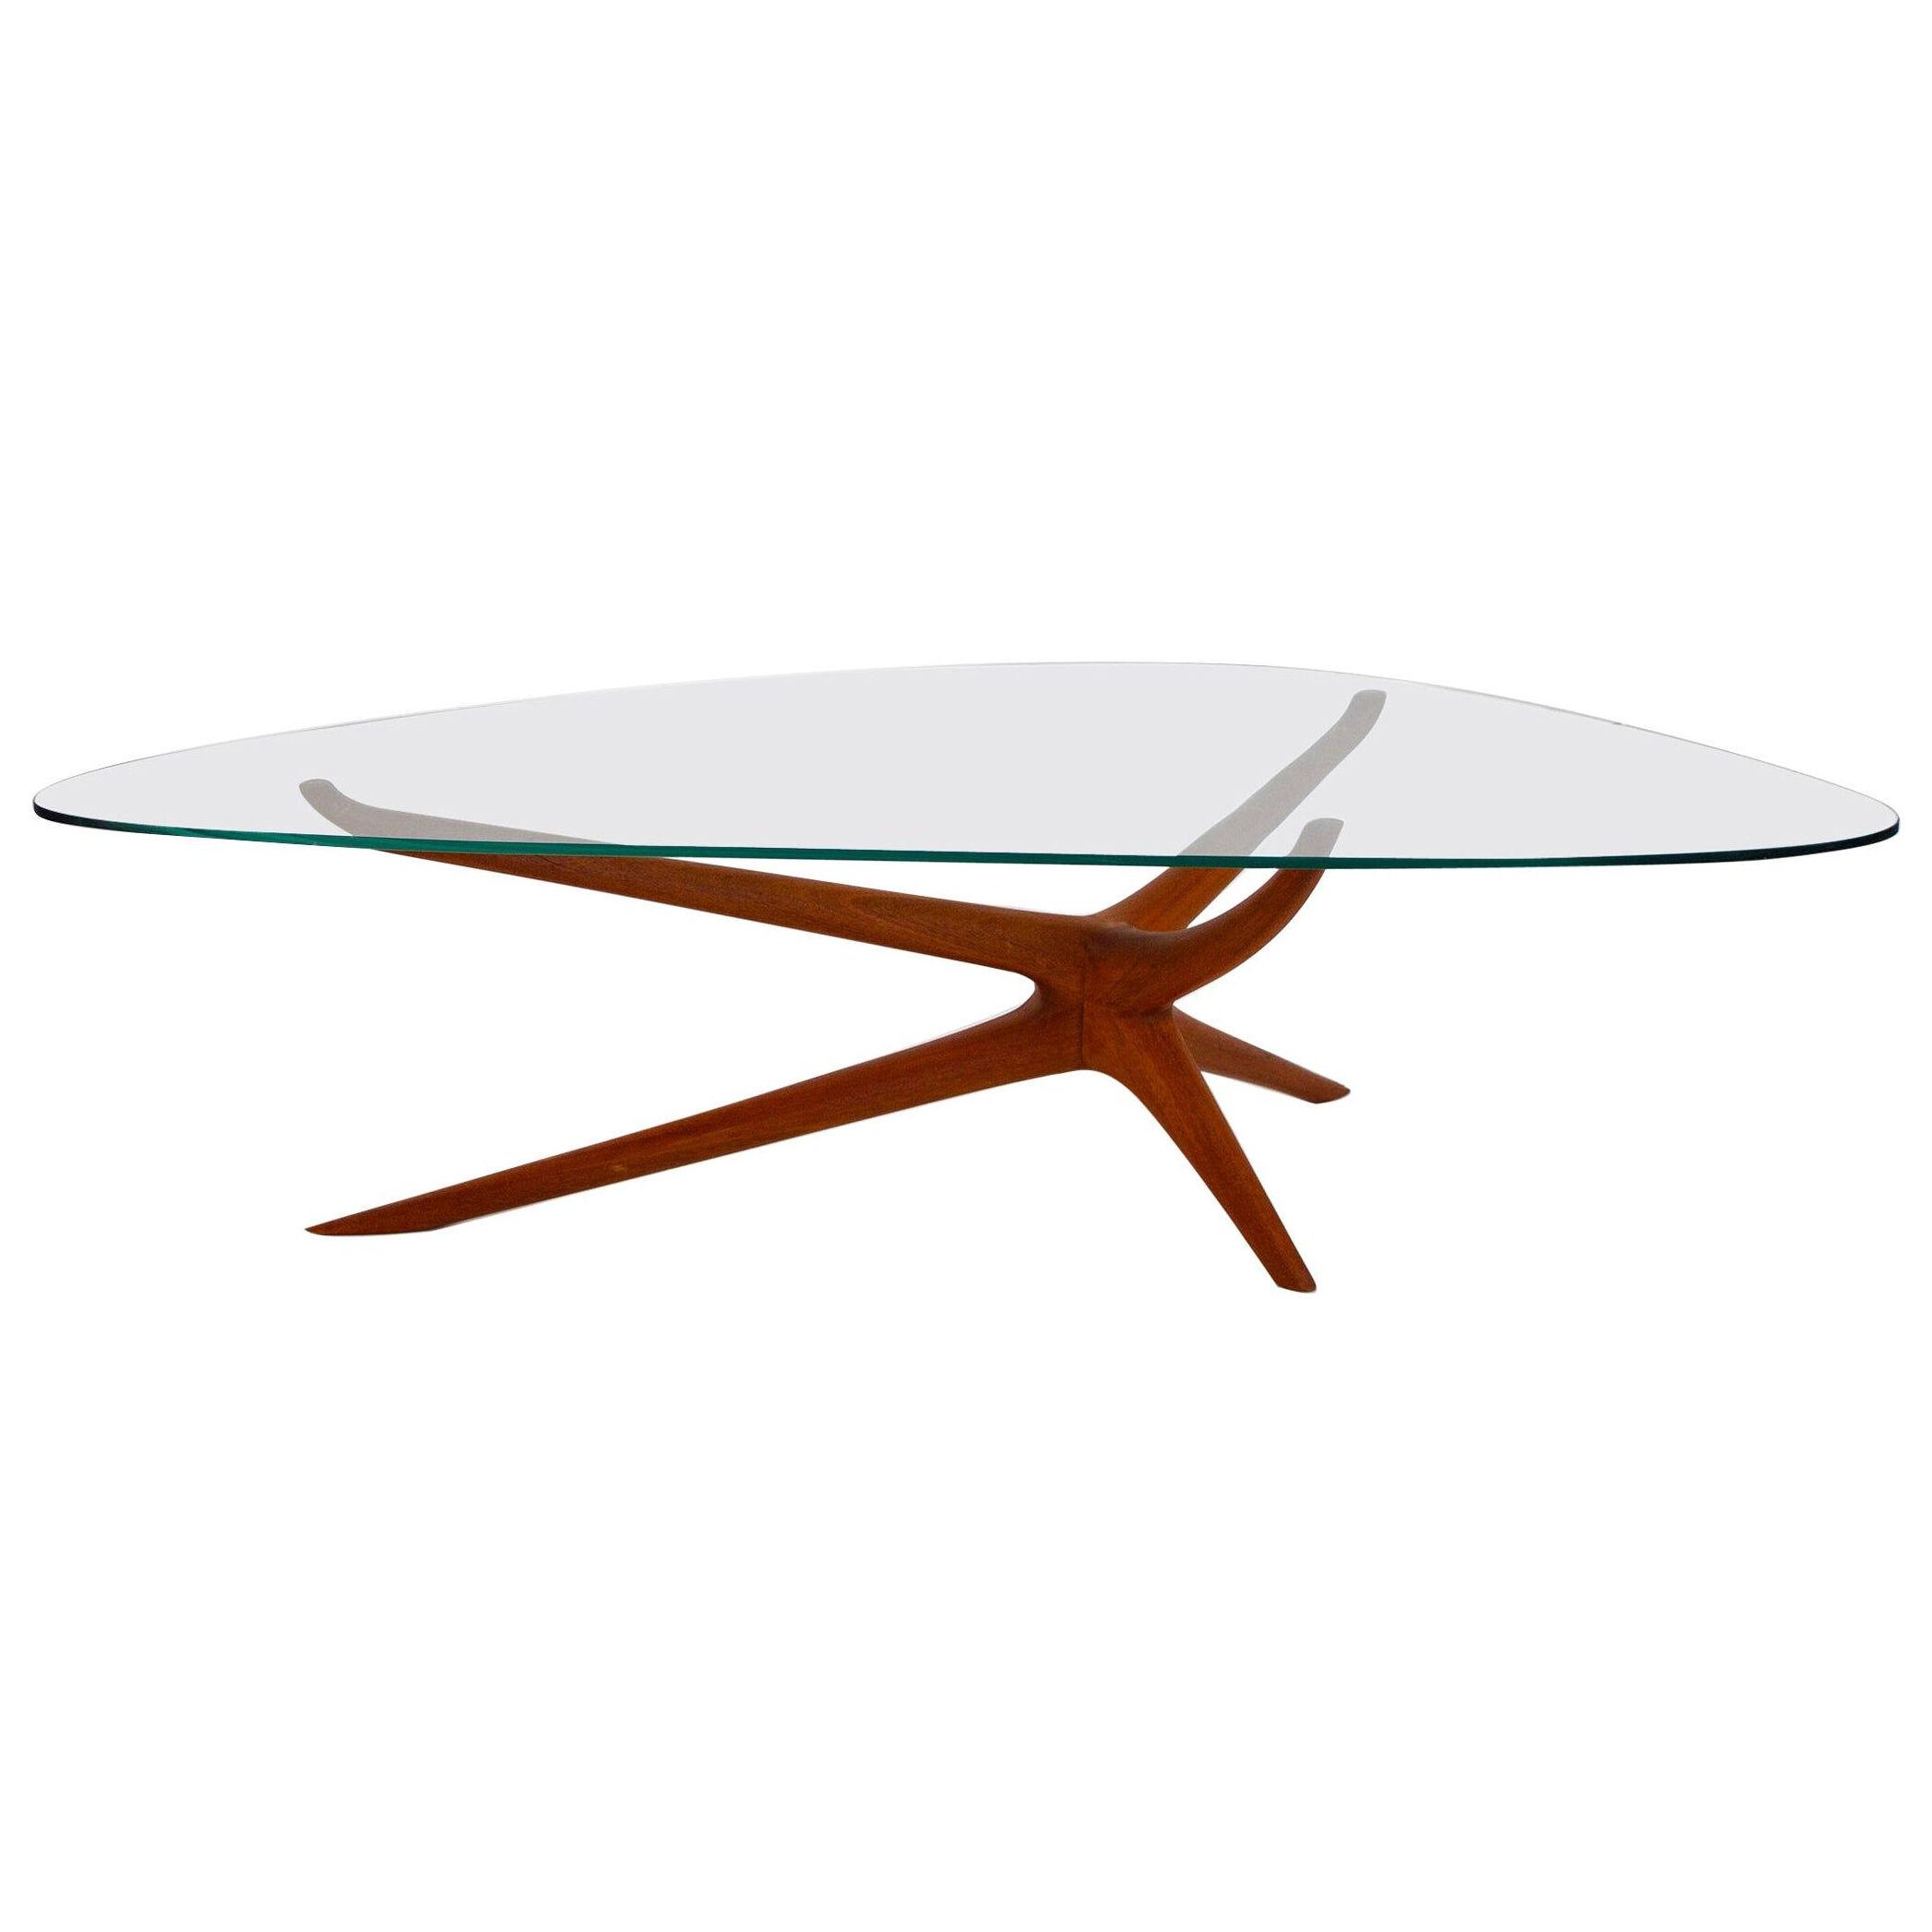 Mid-Century Modern Tri-Symmetric Organic Coffee Table in Mahogany with Glass Top